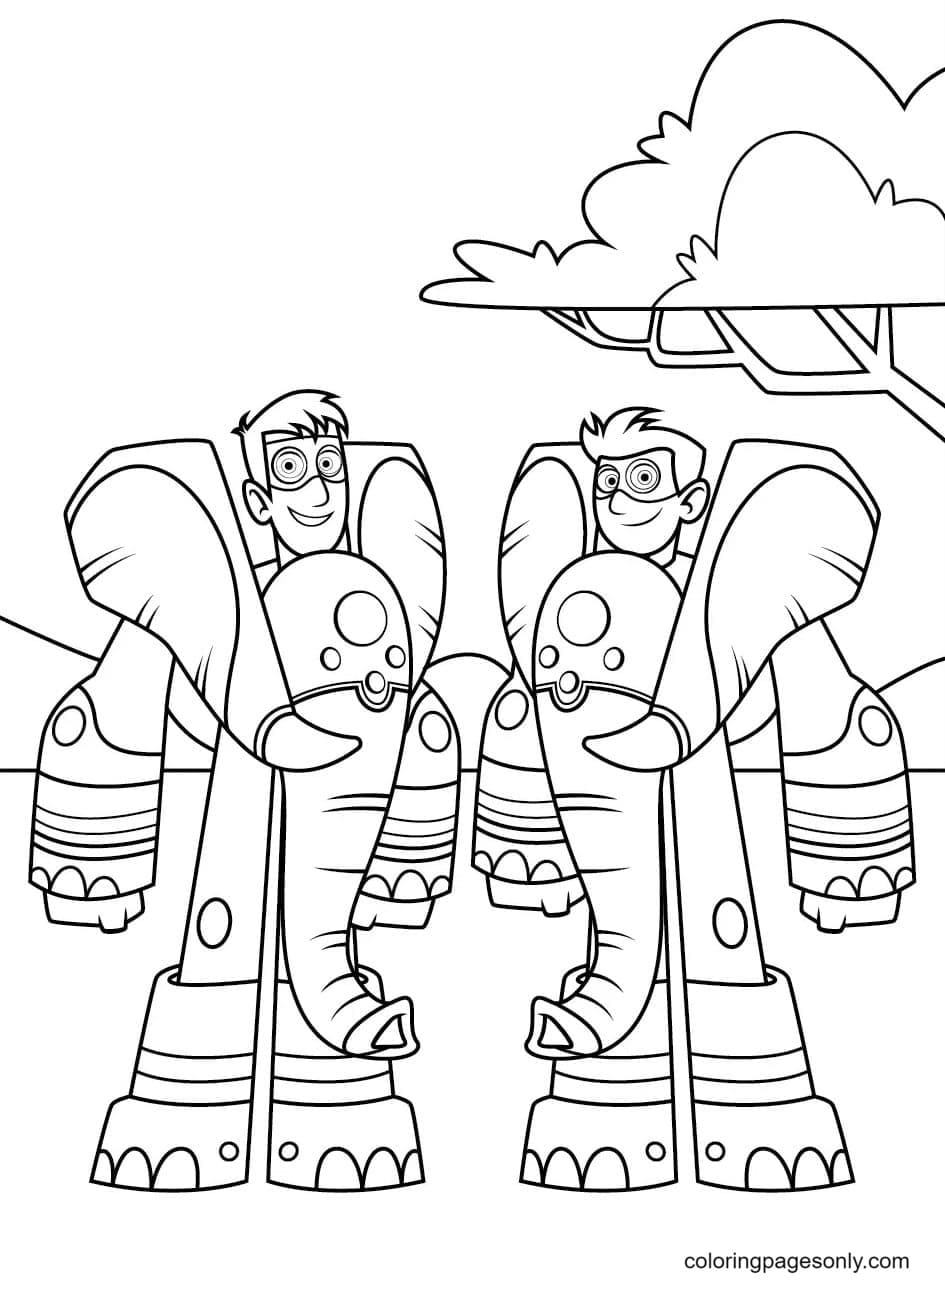 Chris and Martin transformed into elephants with Creature Power Suits Coloring Pages